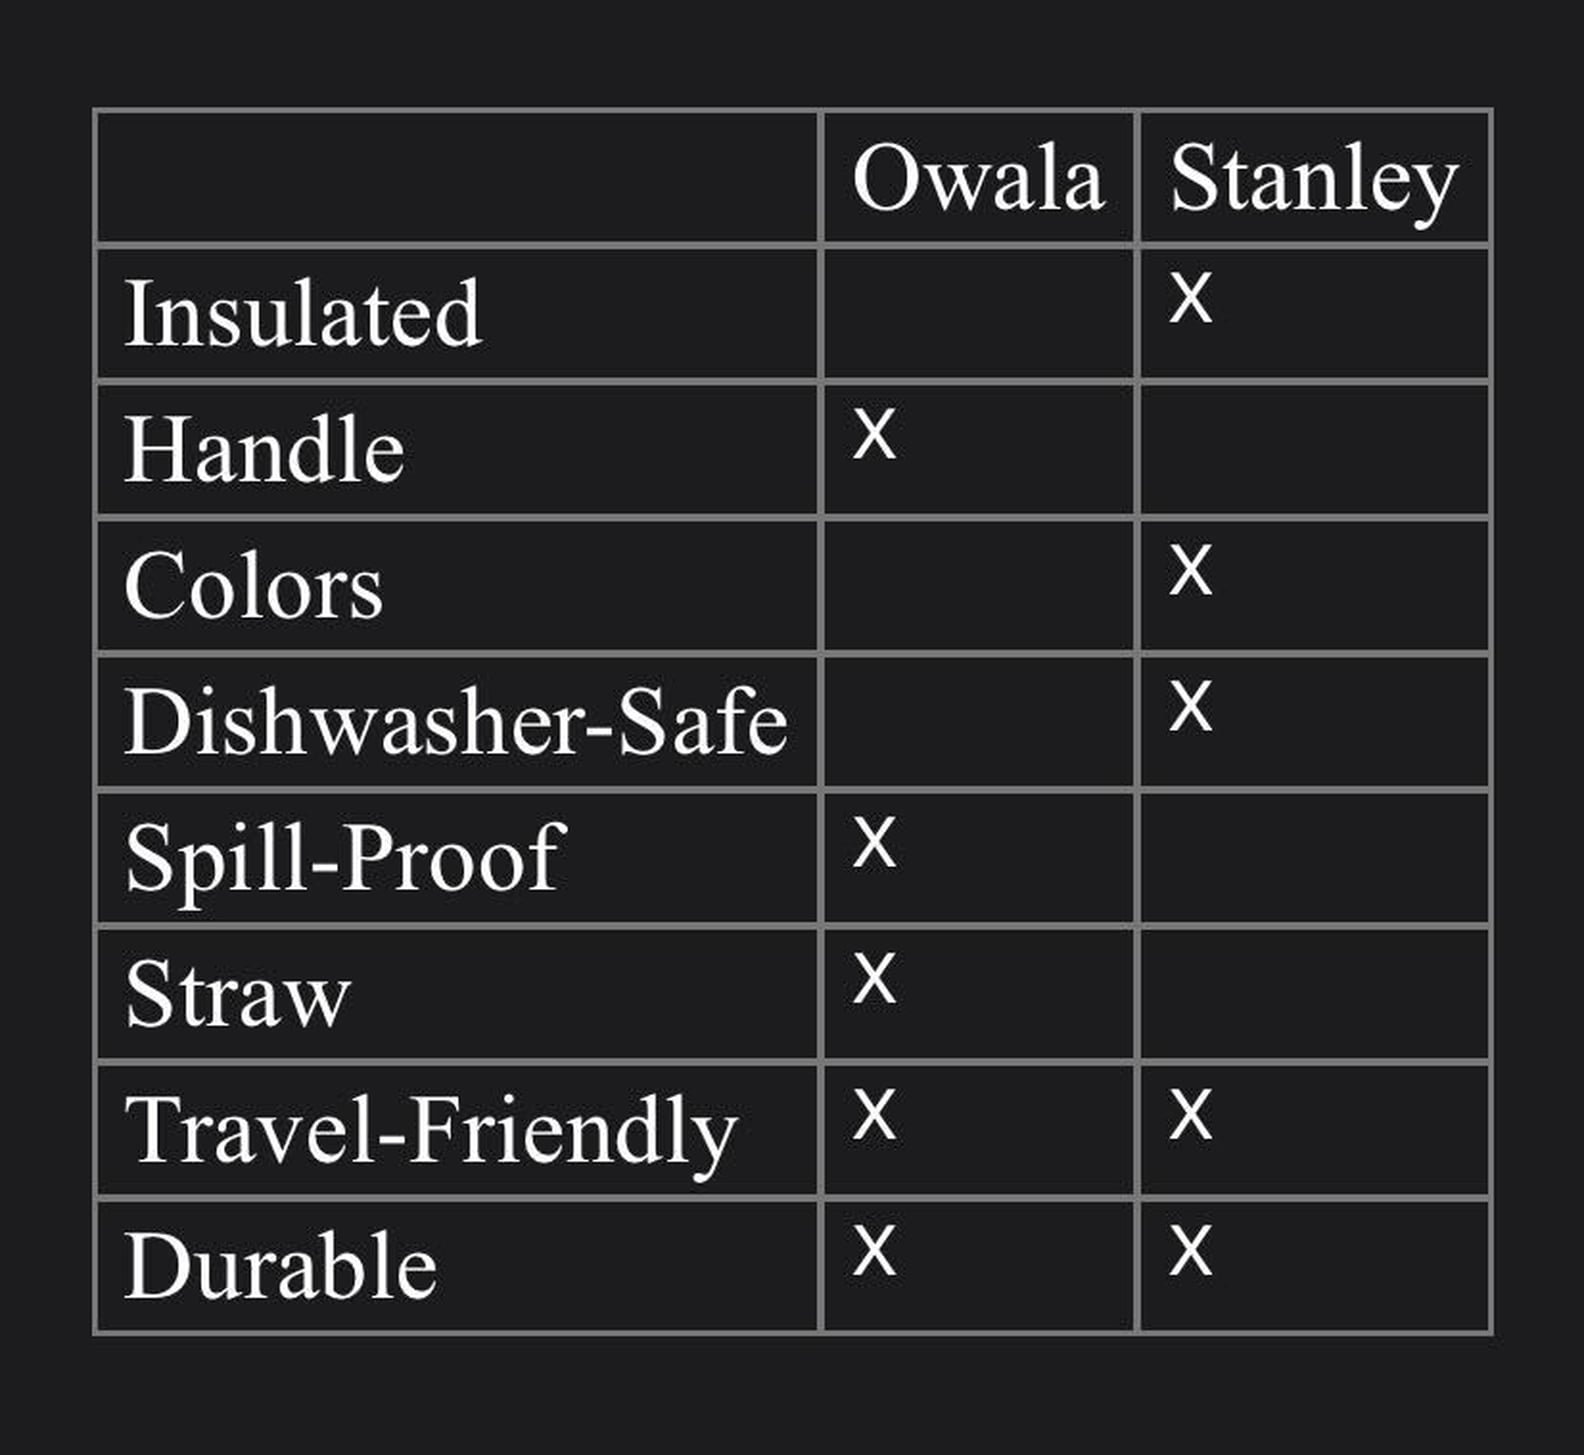 Table of stanley tumbler and owala tumbler features.